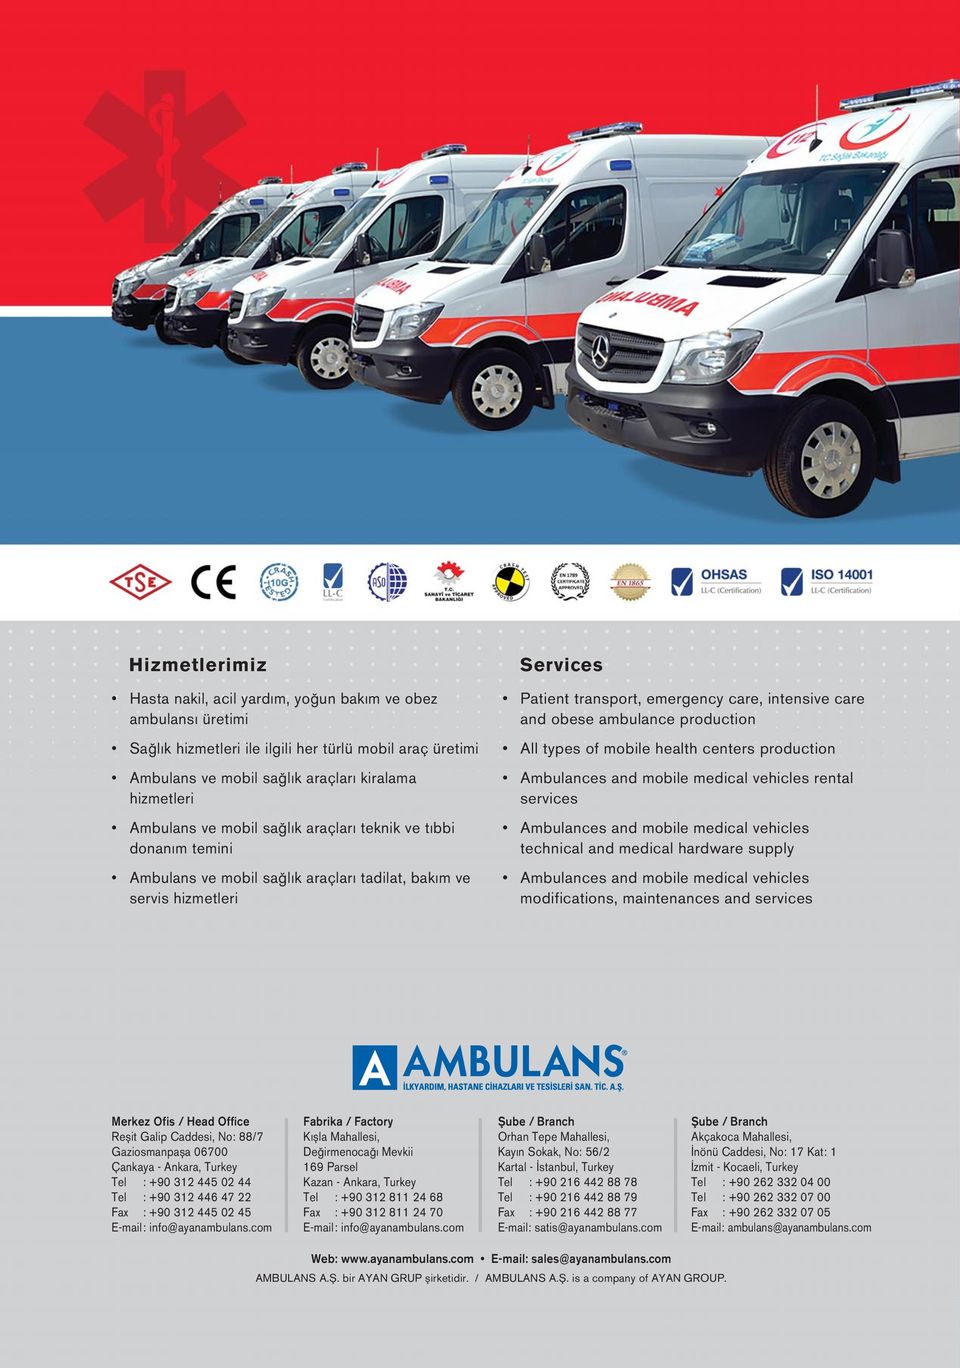 ambulance production All types of mobile health centers production Ambulances and mobile medical vehicles rental services Ambulances and mobile medical vehicles technical and medical hardware supply